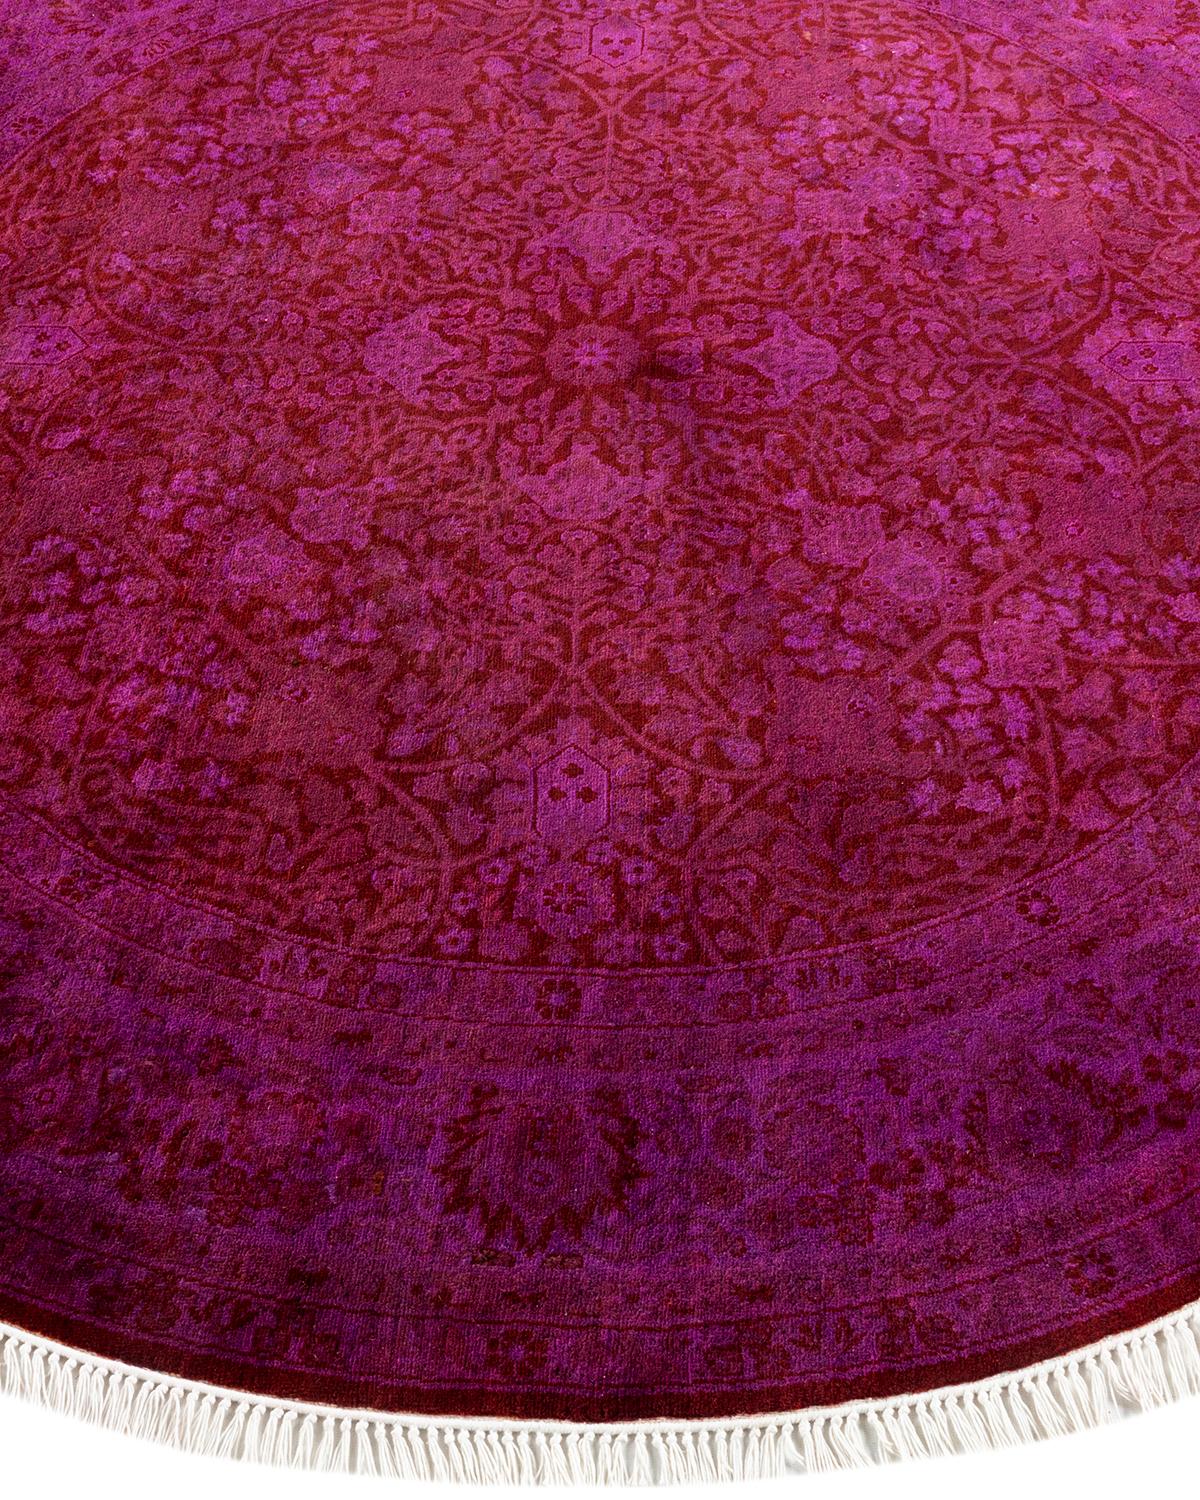 Contemporary Overdyed Hand Knotted Wool Purple Round Area Rug In New Condition For Sale In Norwalk, CT